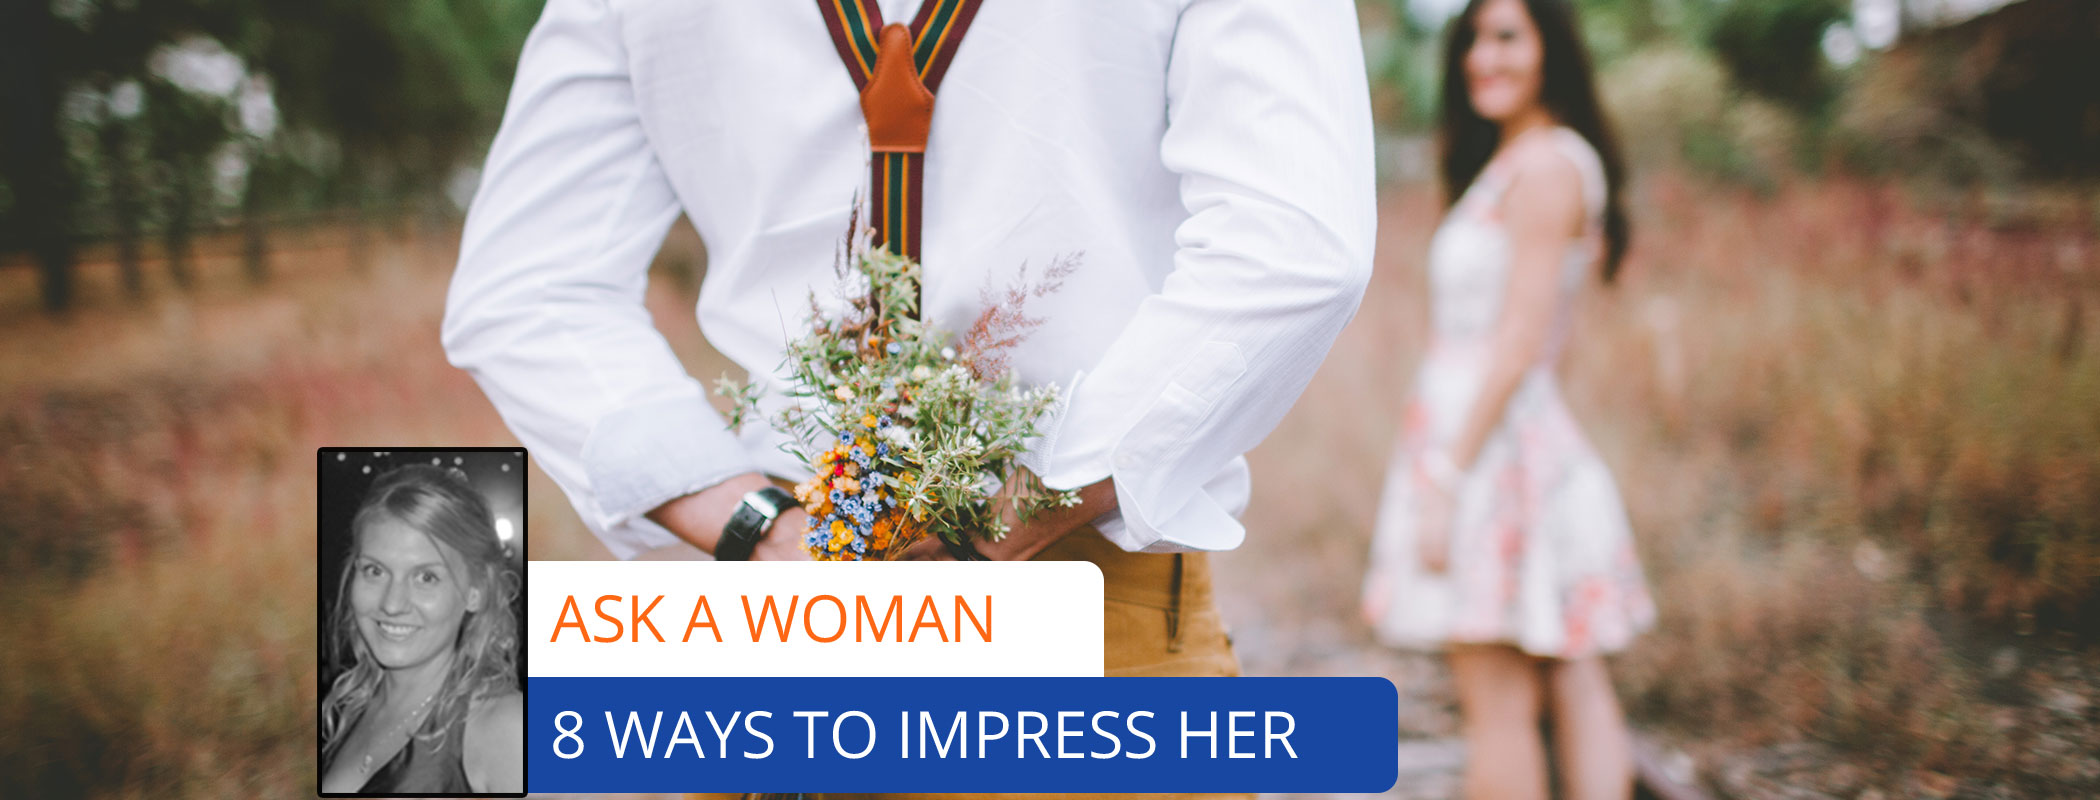 How To Impress a Woman